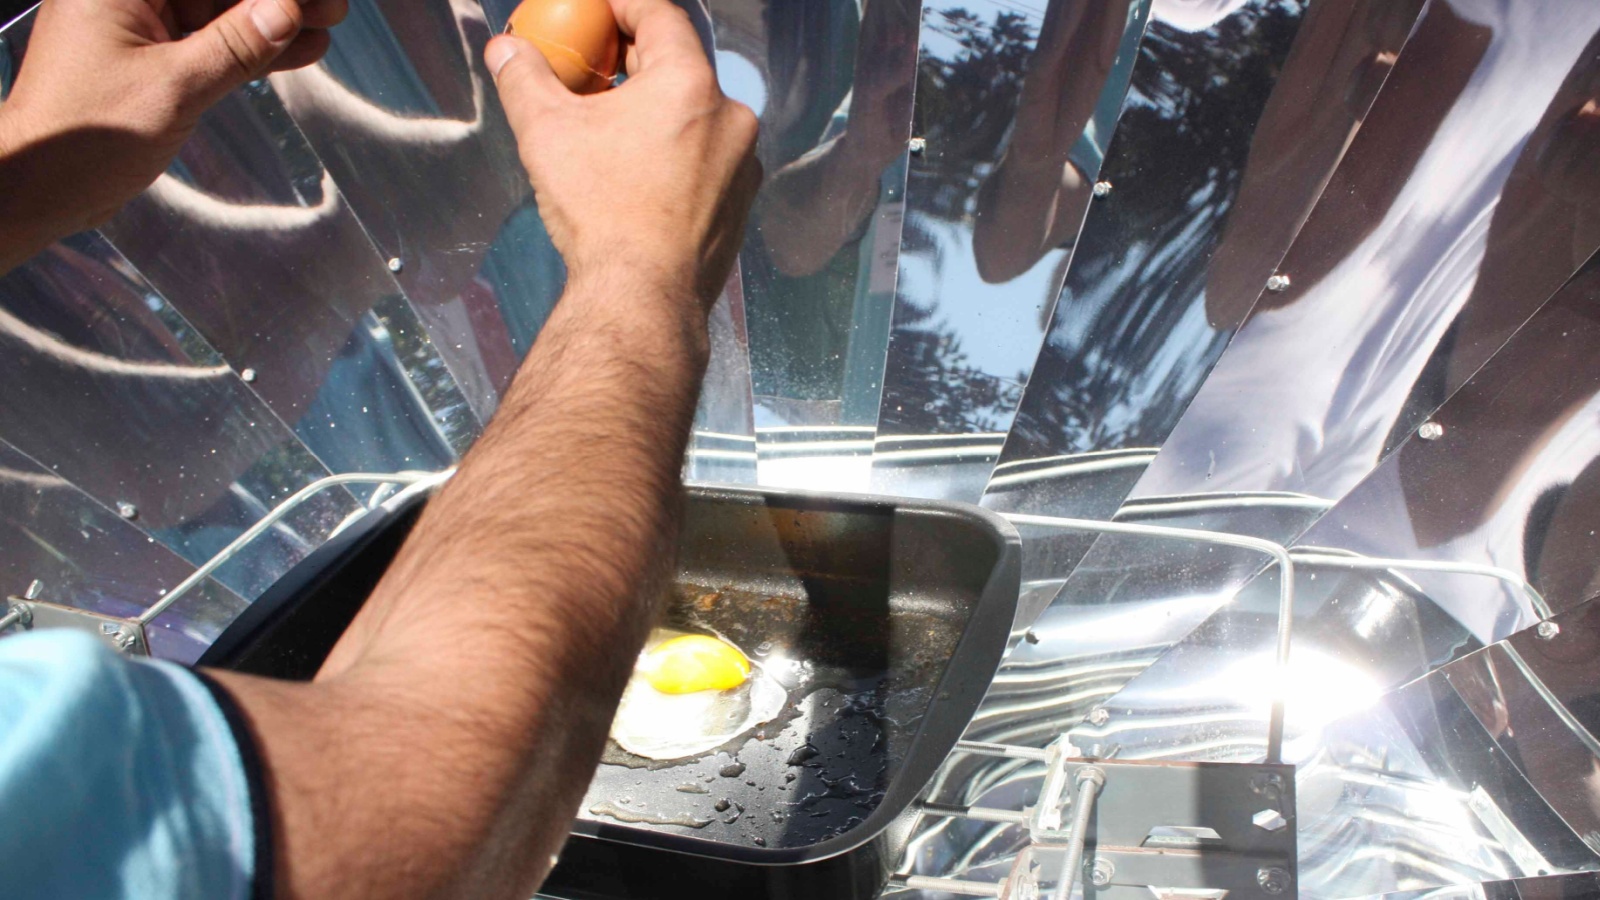 fried egg with solar energy without fire, solar oven